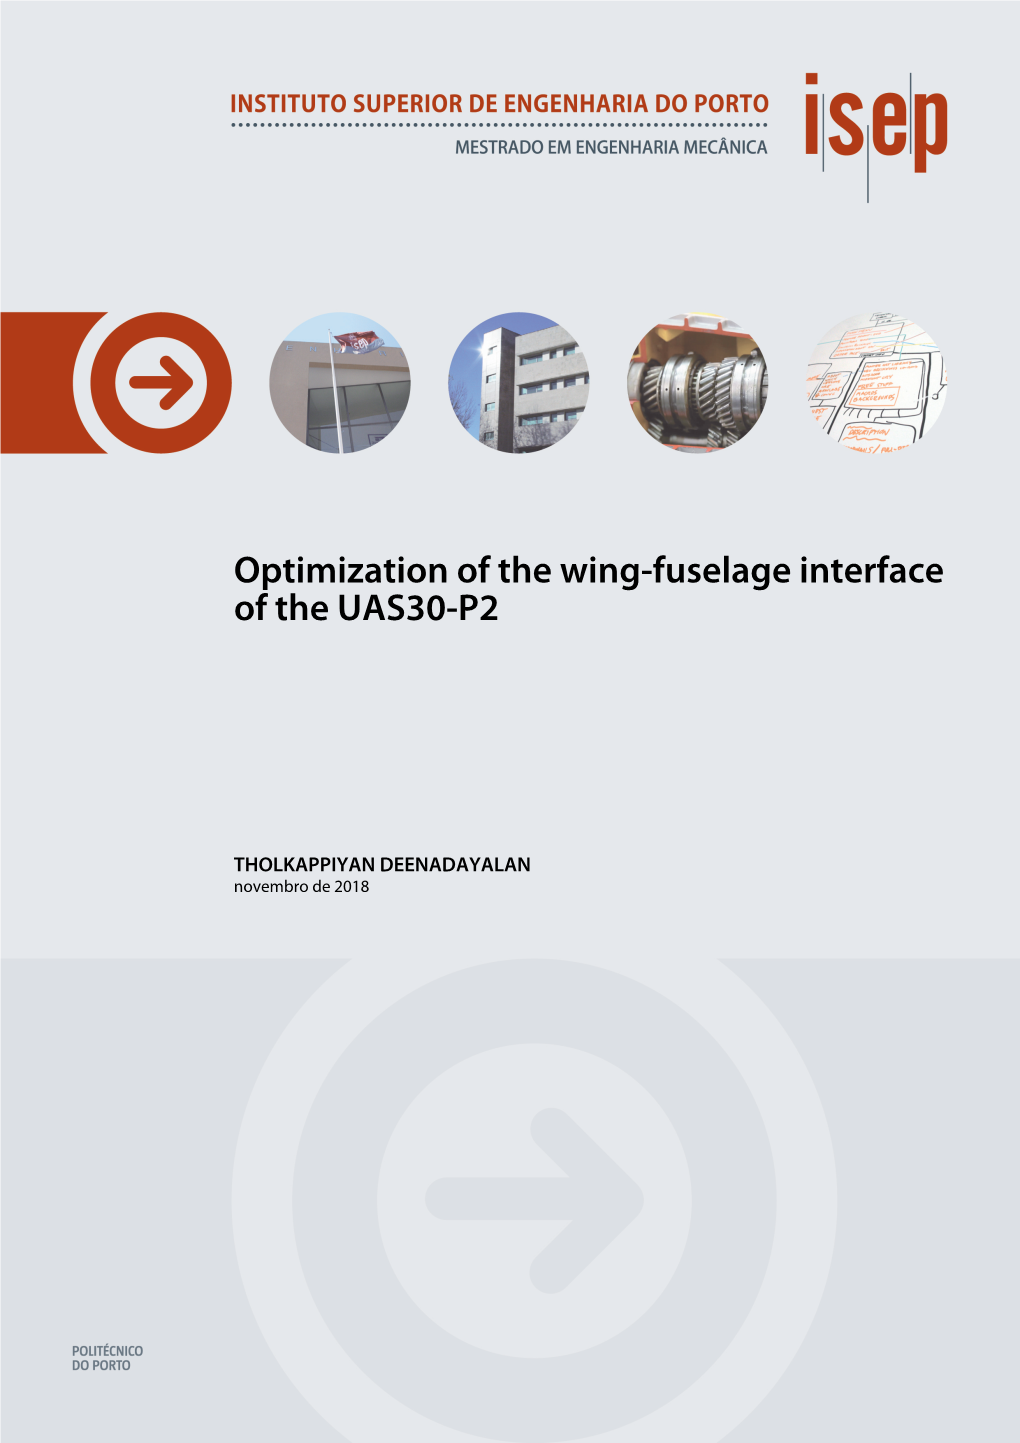 Optimization of the Wing-Fuselage Interface of the UAS30-P2